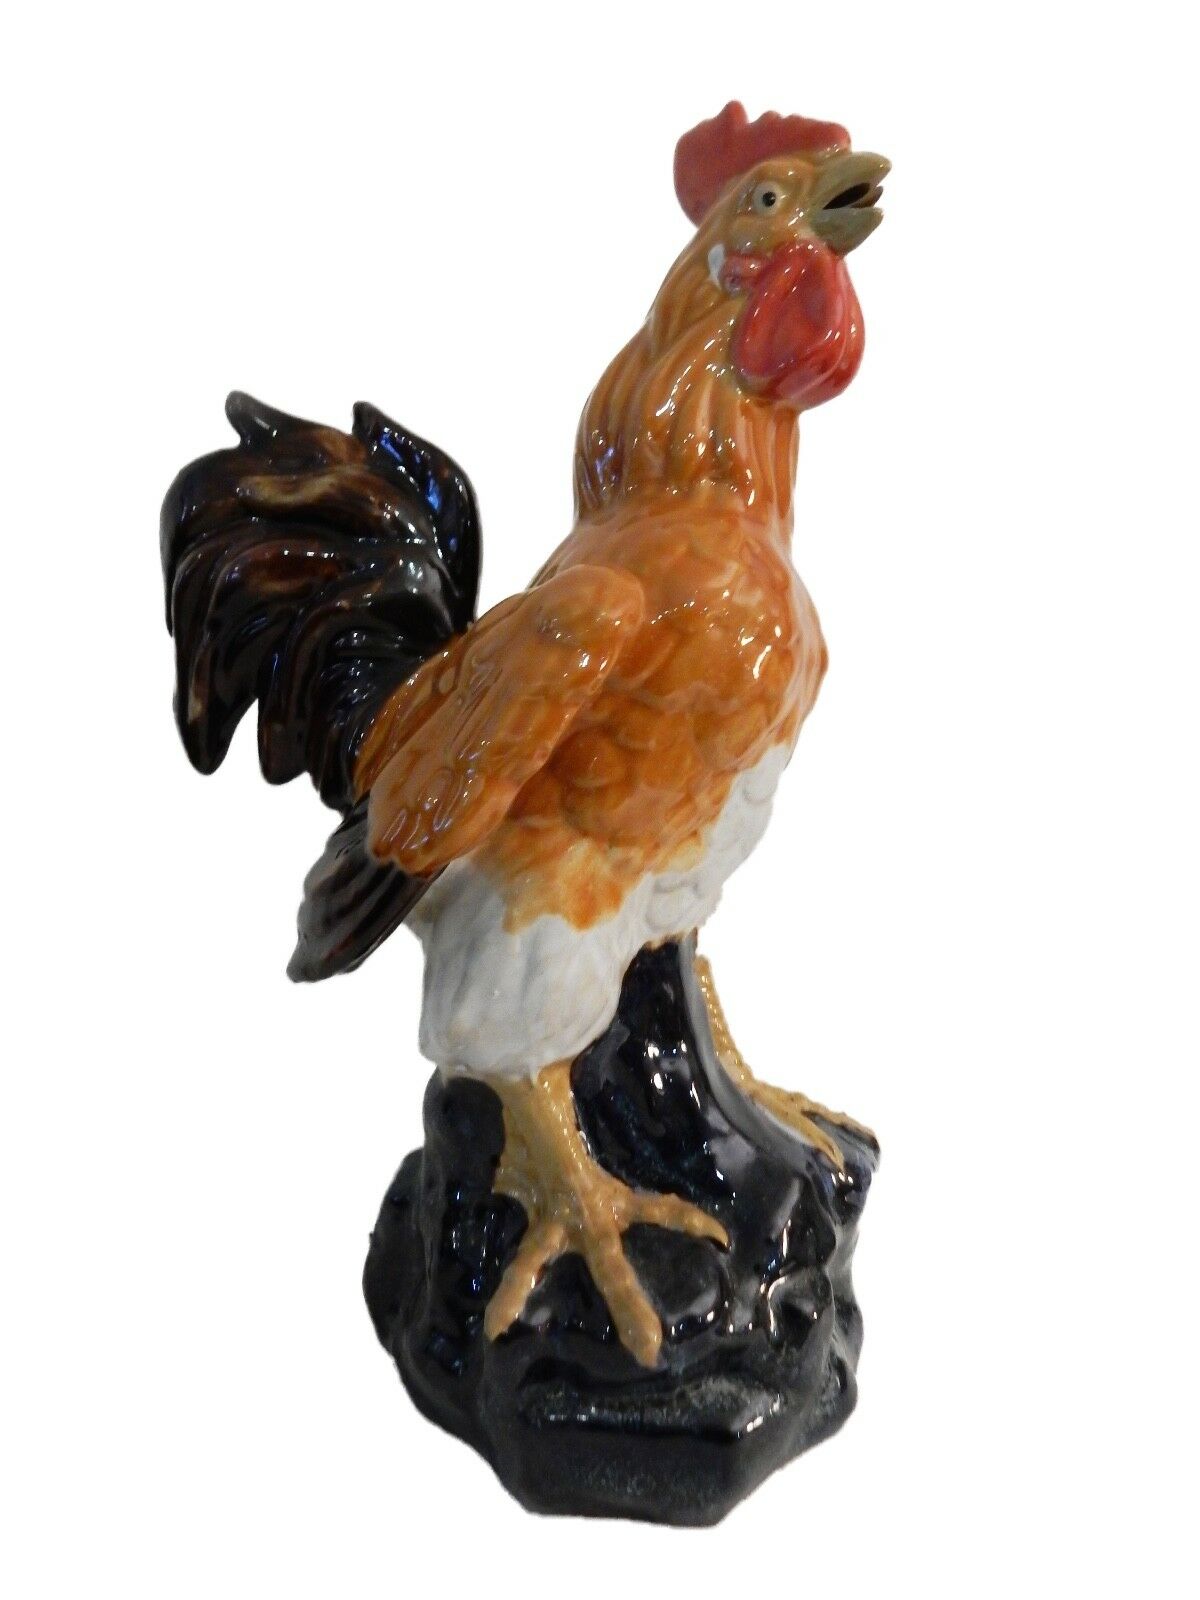 #266 Superb LG  Chinese Ceramic Figure of a  Rooster 17.5"H